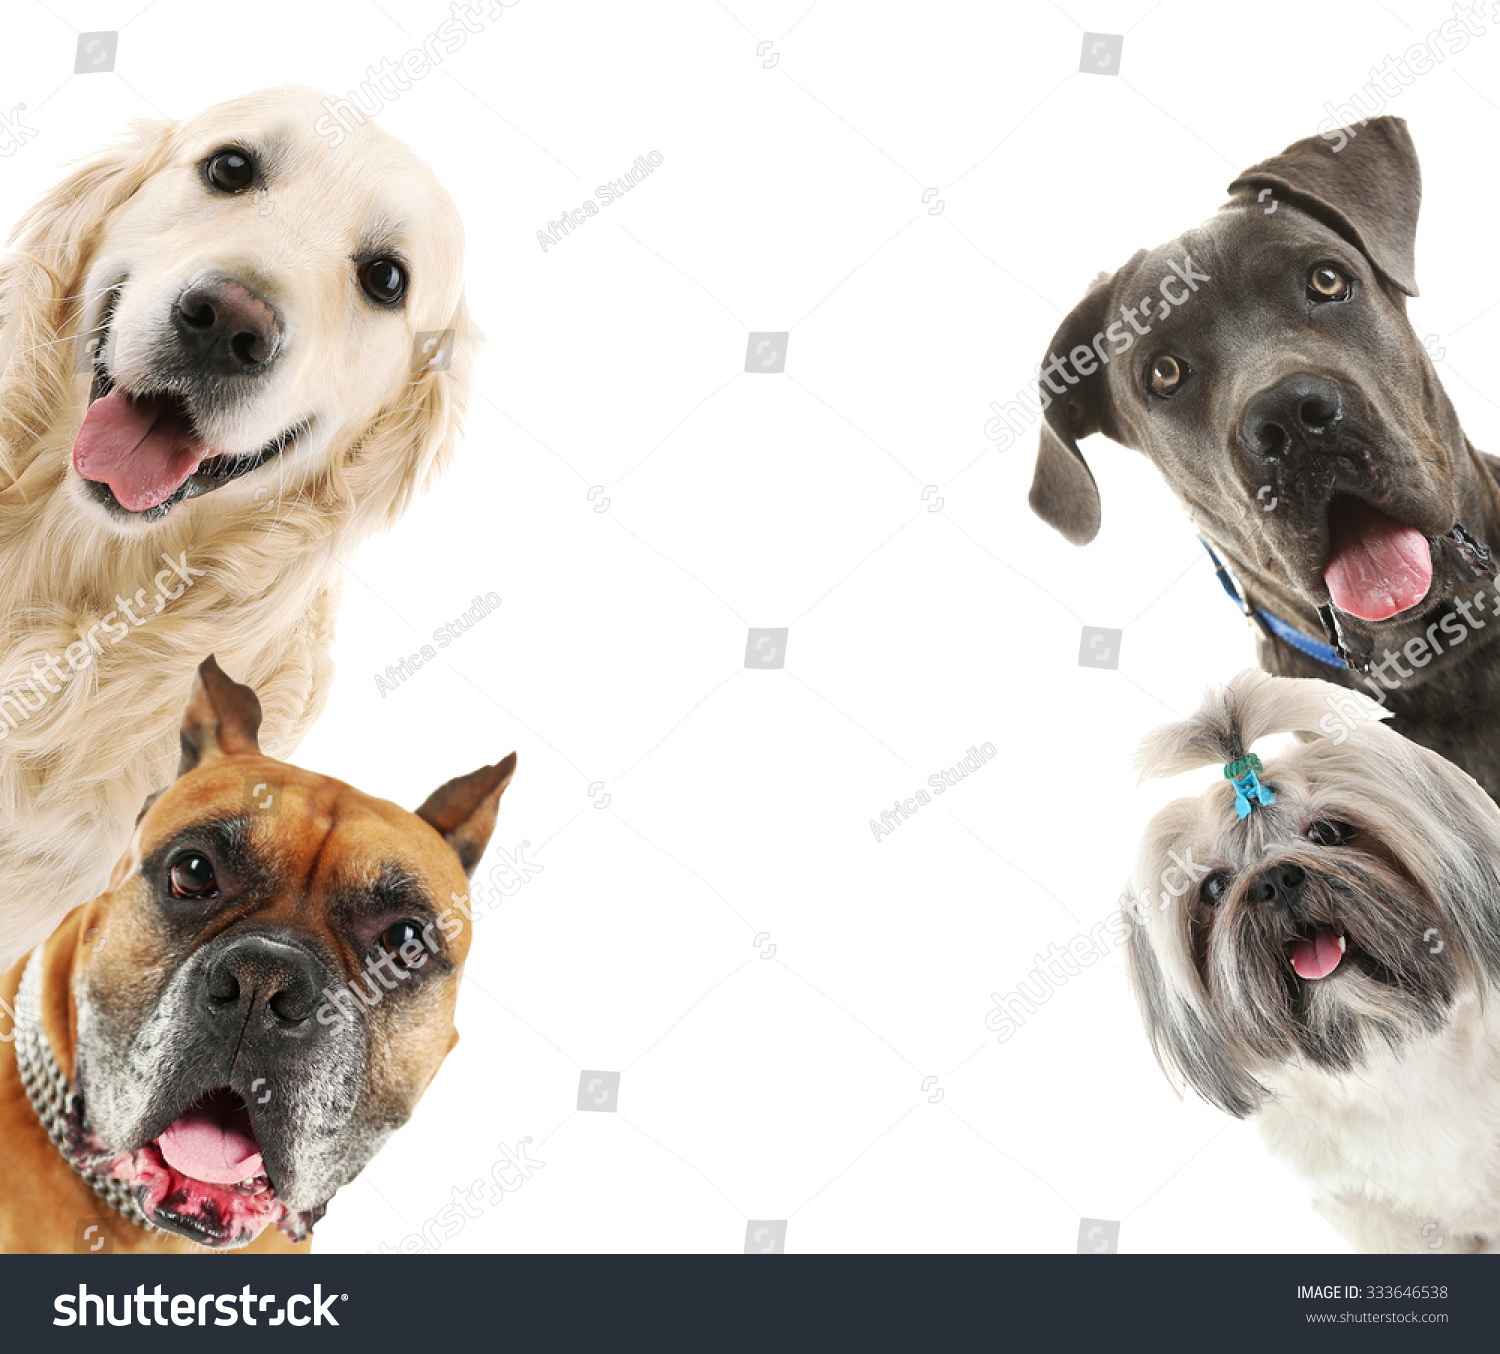 powerpoint-template-dogs-isolated-on-white-kkknlnmkp